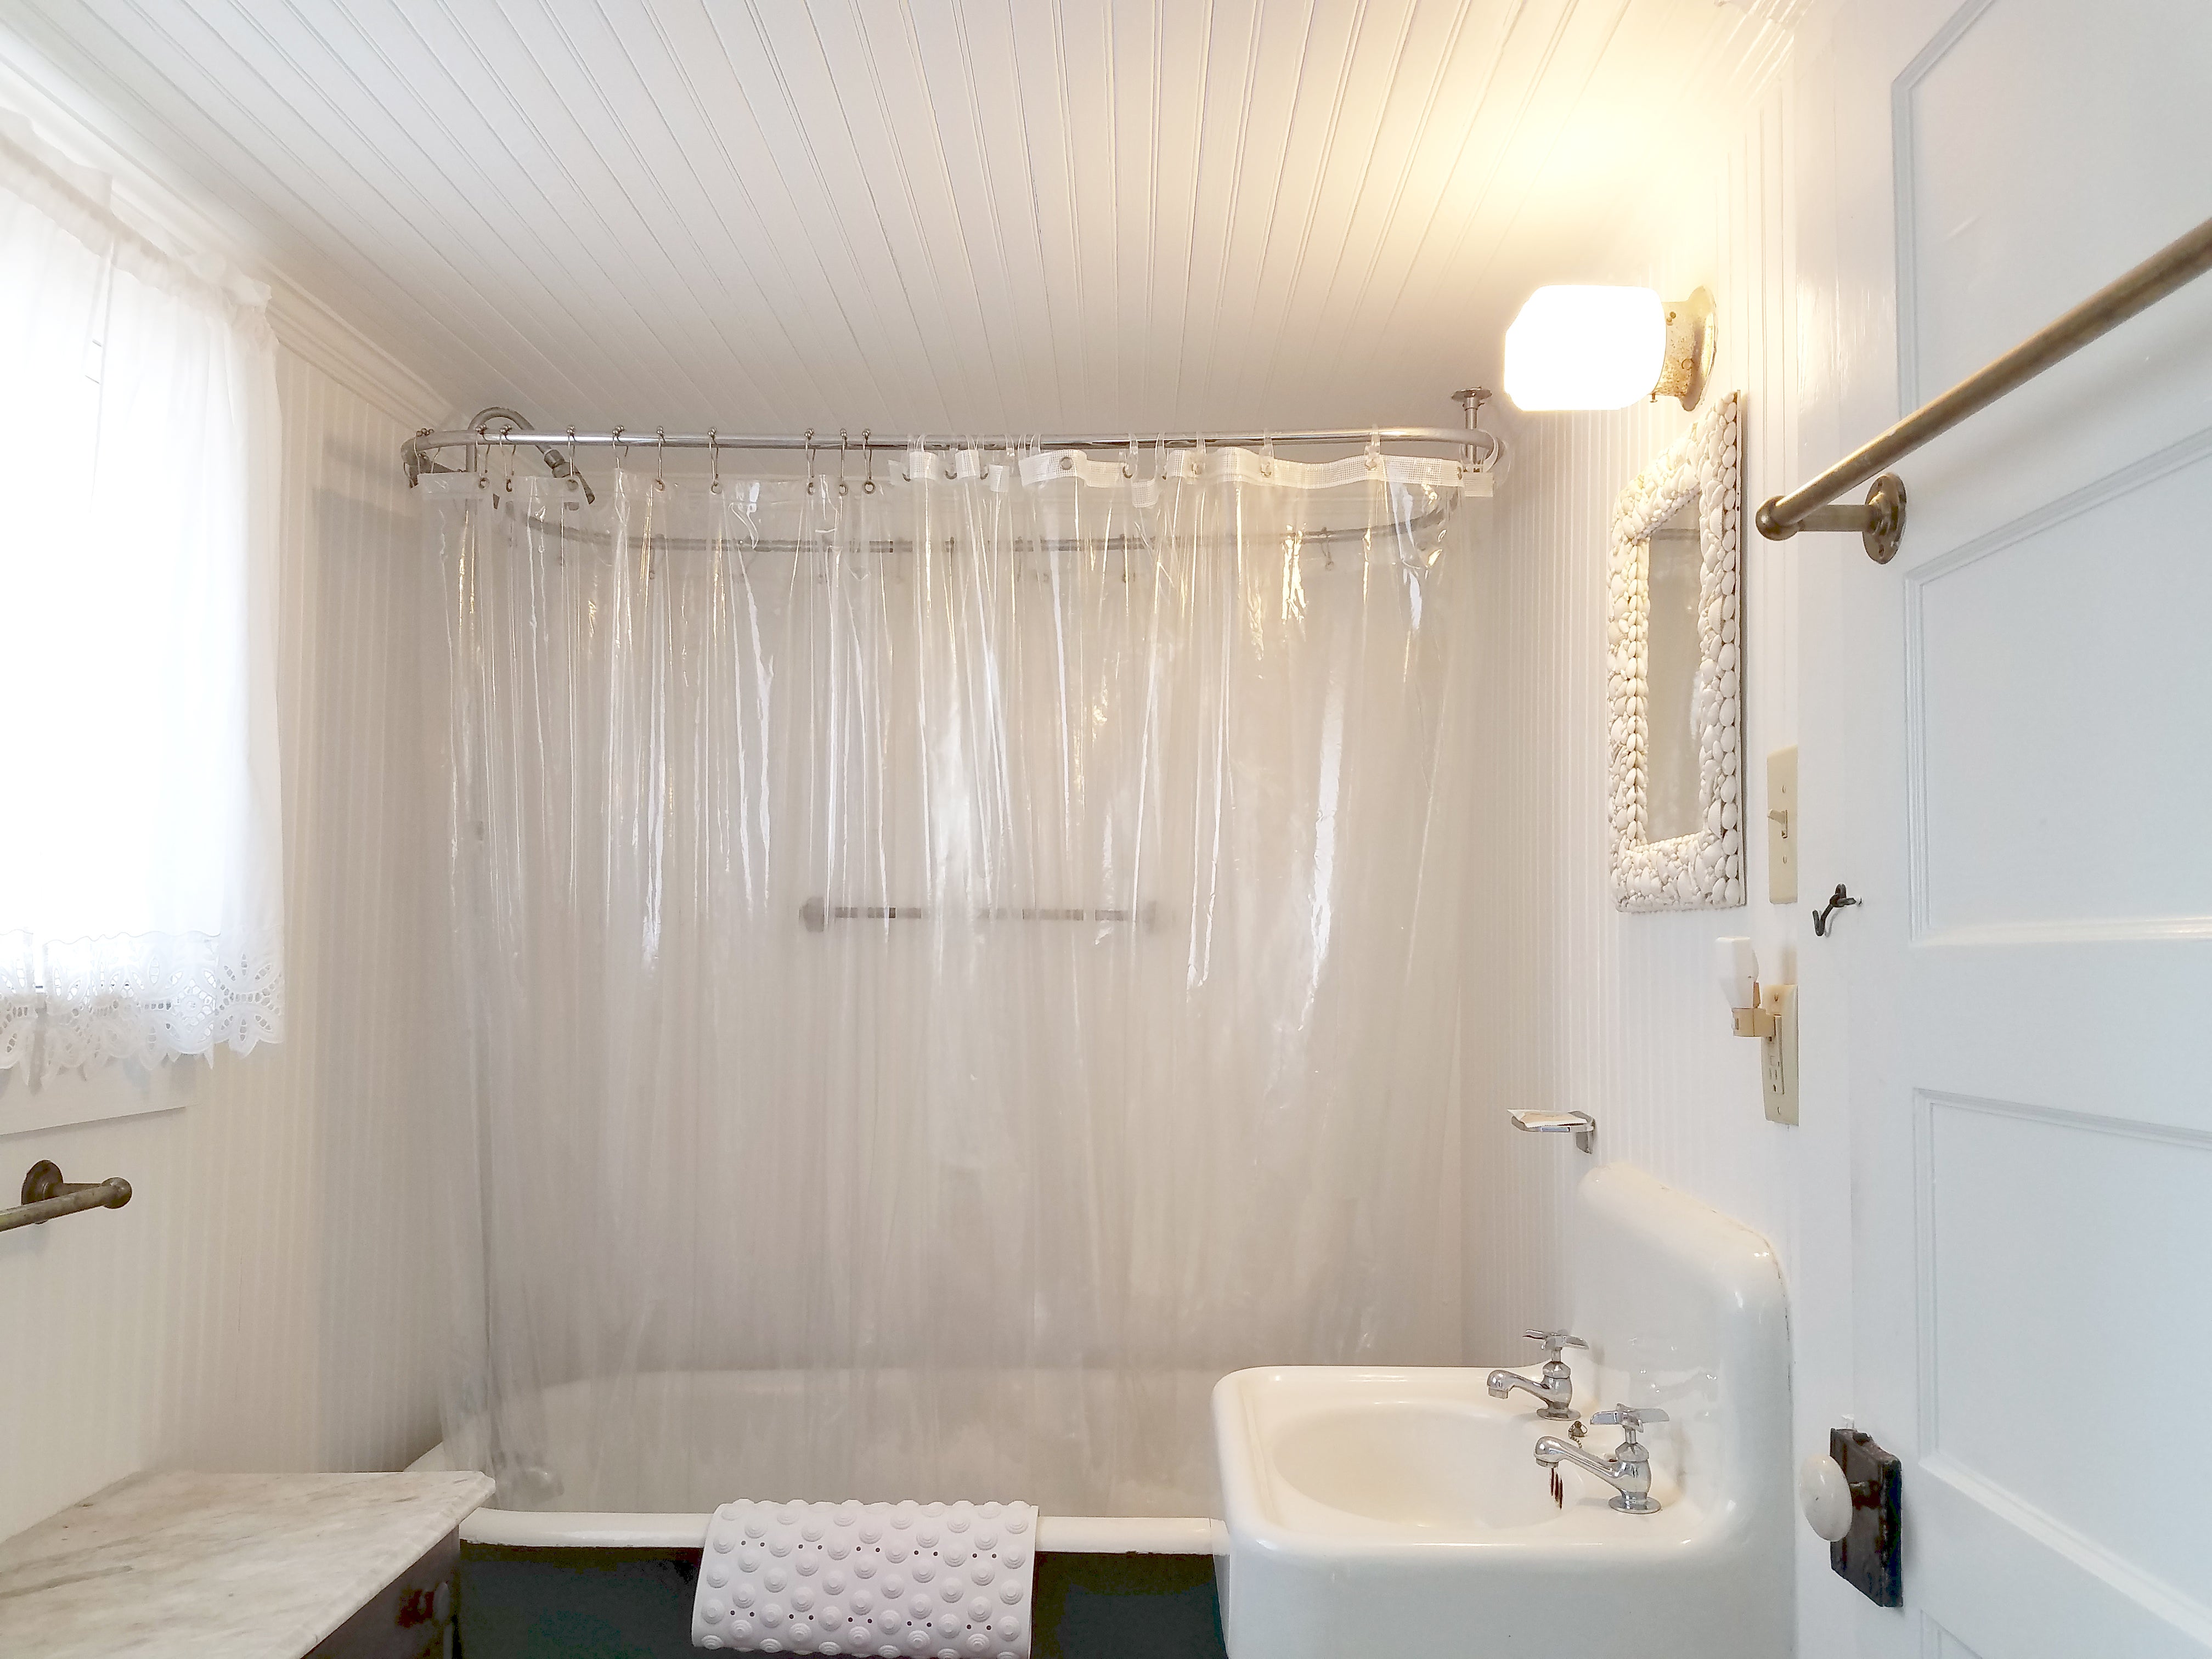 Bath with TubShower, First Floor, Access from King Bedroom and Outside